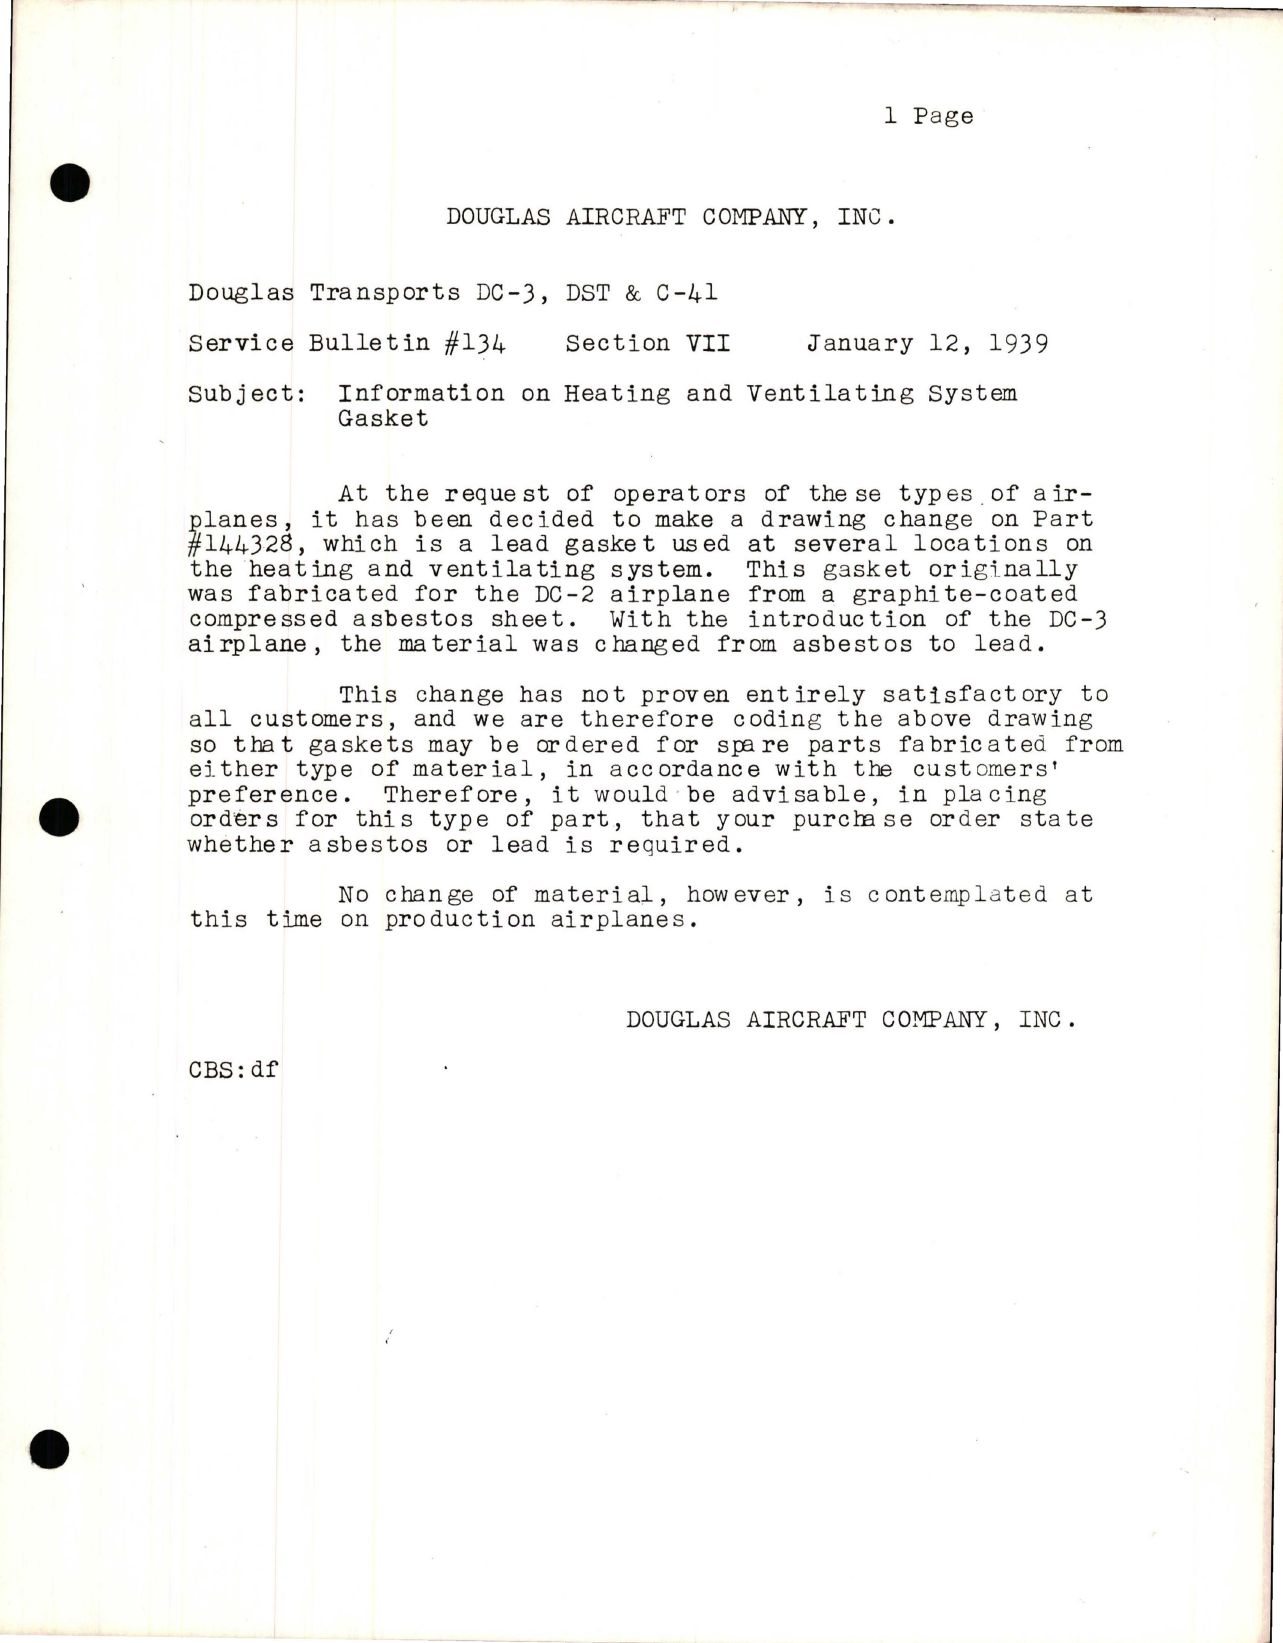 Sample page 1 from AirCorps Library document: Information on Heating and Ventilating System Gasket